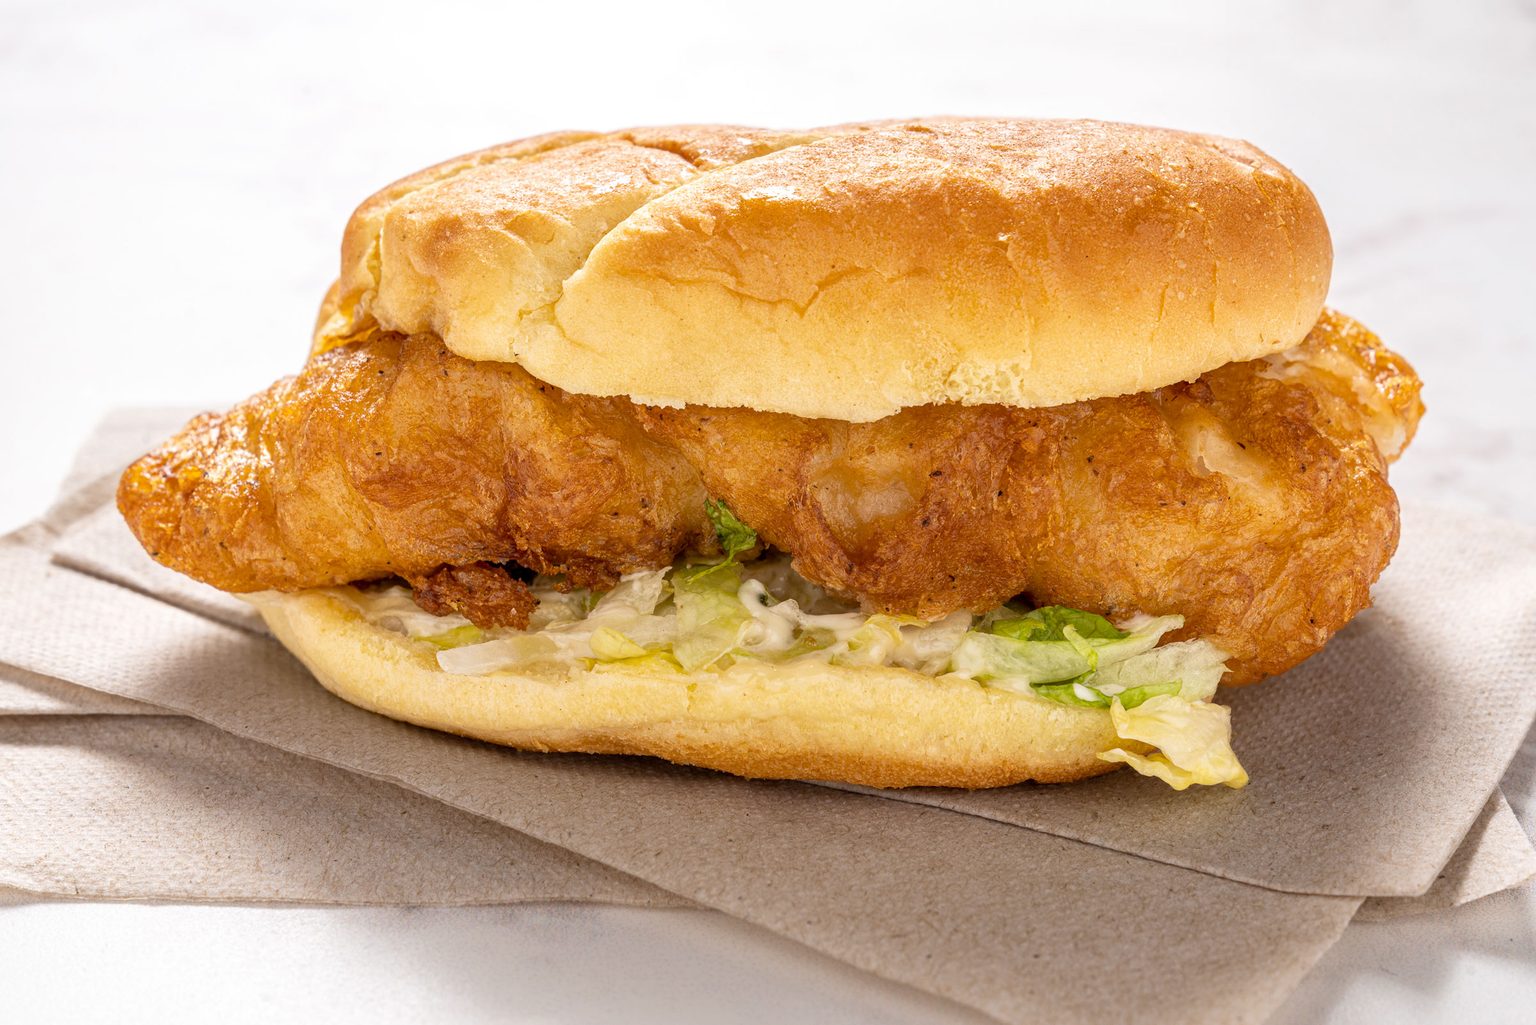 We Visited 7 DriveThrus to Find the Best FastFood Fish Sandwich